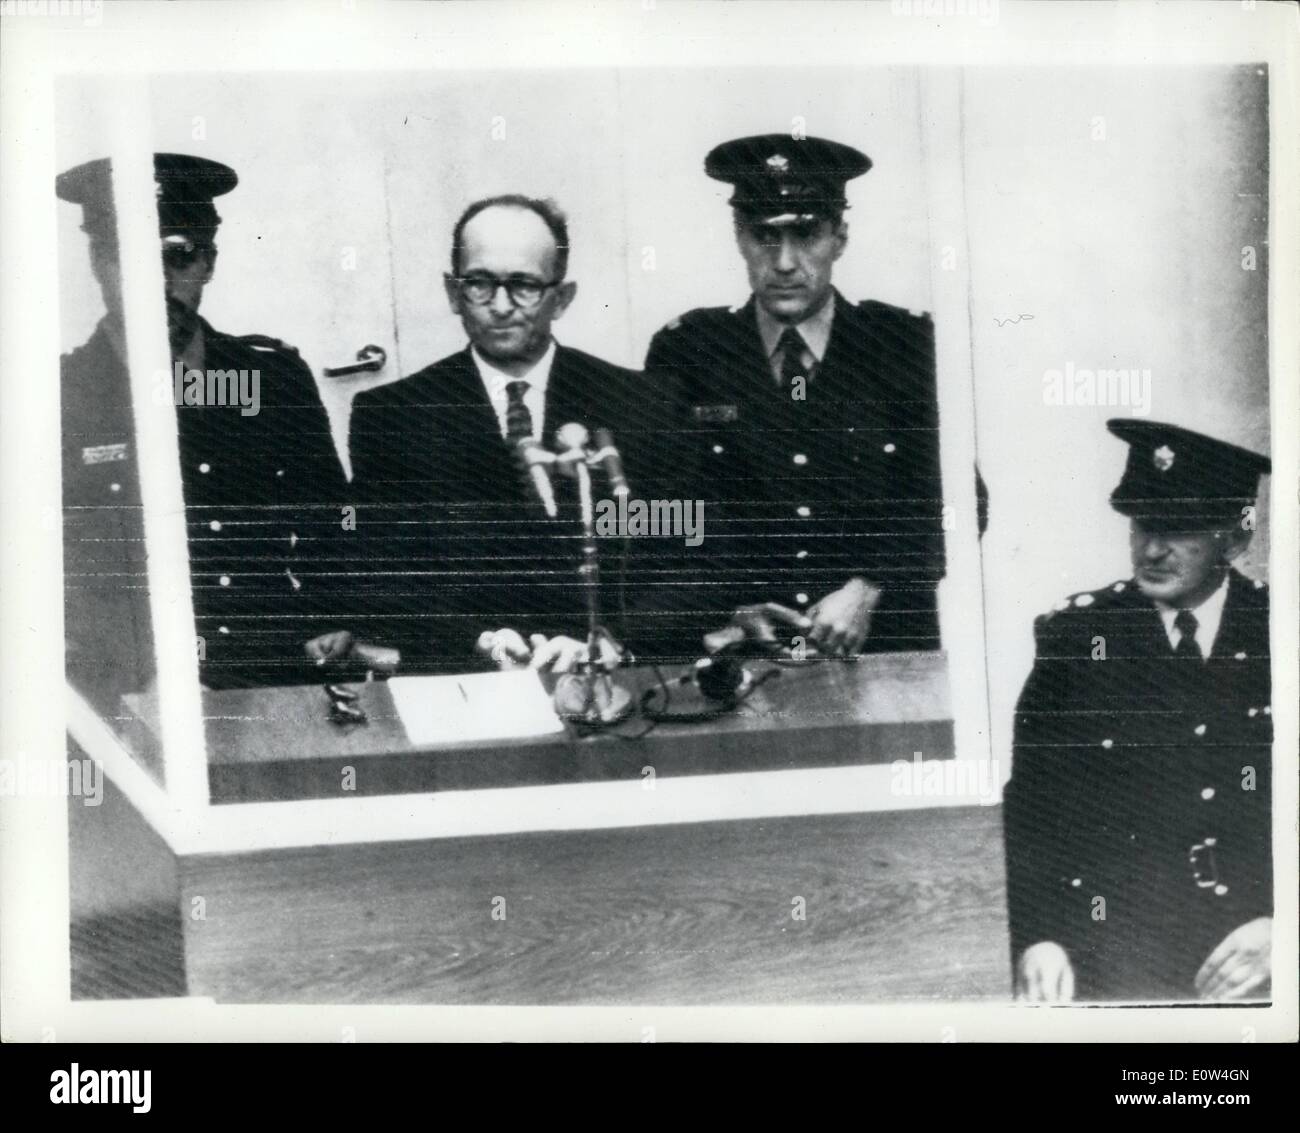 Apr. 04, 1961 - Opening of the Adolf Eichmann trail - in Jerusalem. chanced with mass murder of the Jews. The trial opened the morning in Jerusalem of Adolf elchmanh- former Nazi s.s.colonel - on charges of the Mann murder of millions of Jews in concentration campe during the war. photo shows Well guarded with a policeman on either side of home - Adolf Eichmann seen in his special bullet proof dook - at the opening of his trial in Jerusalem this morning. Stock Photo